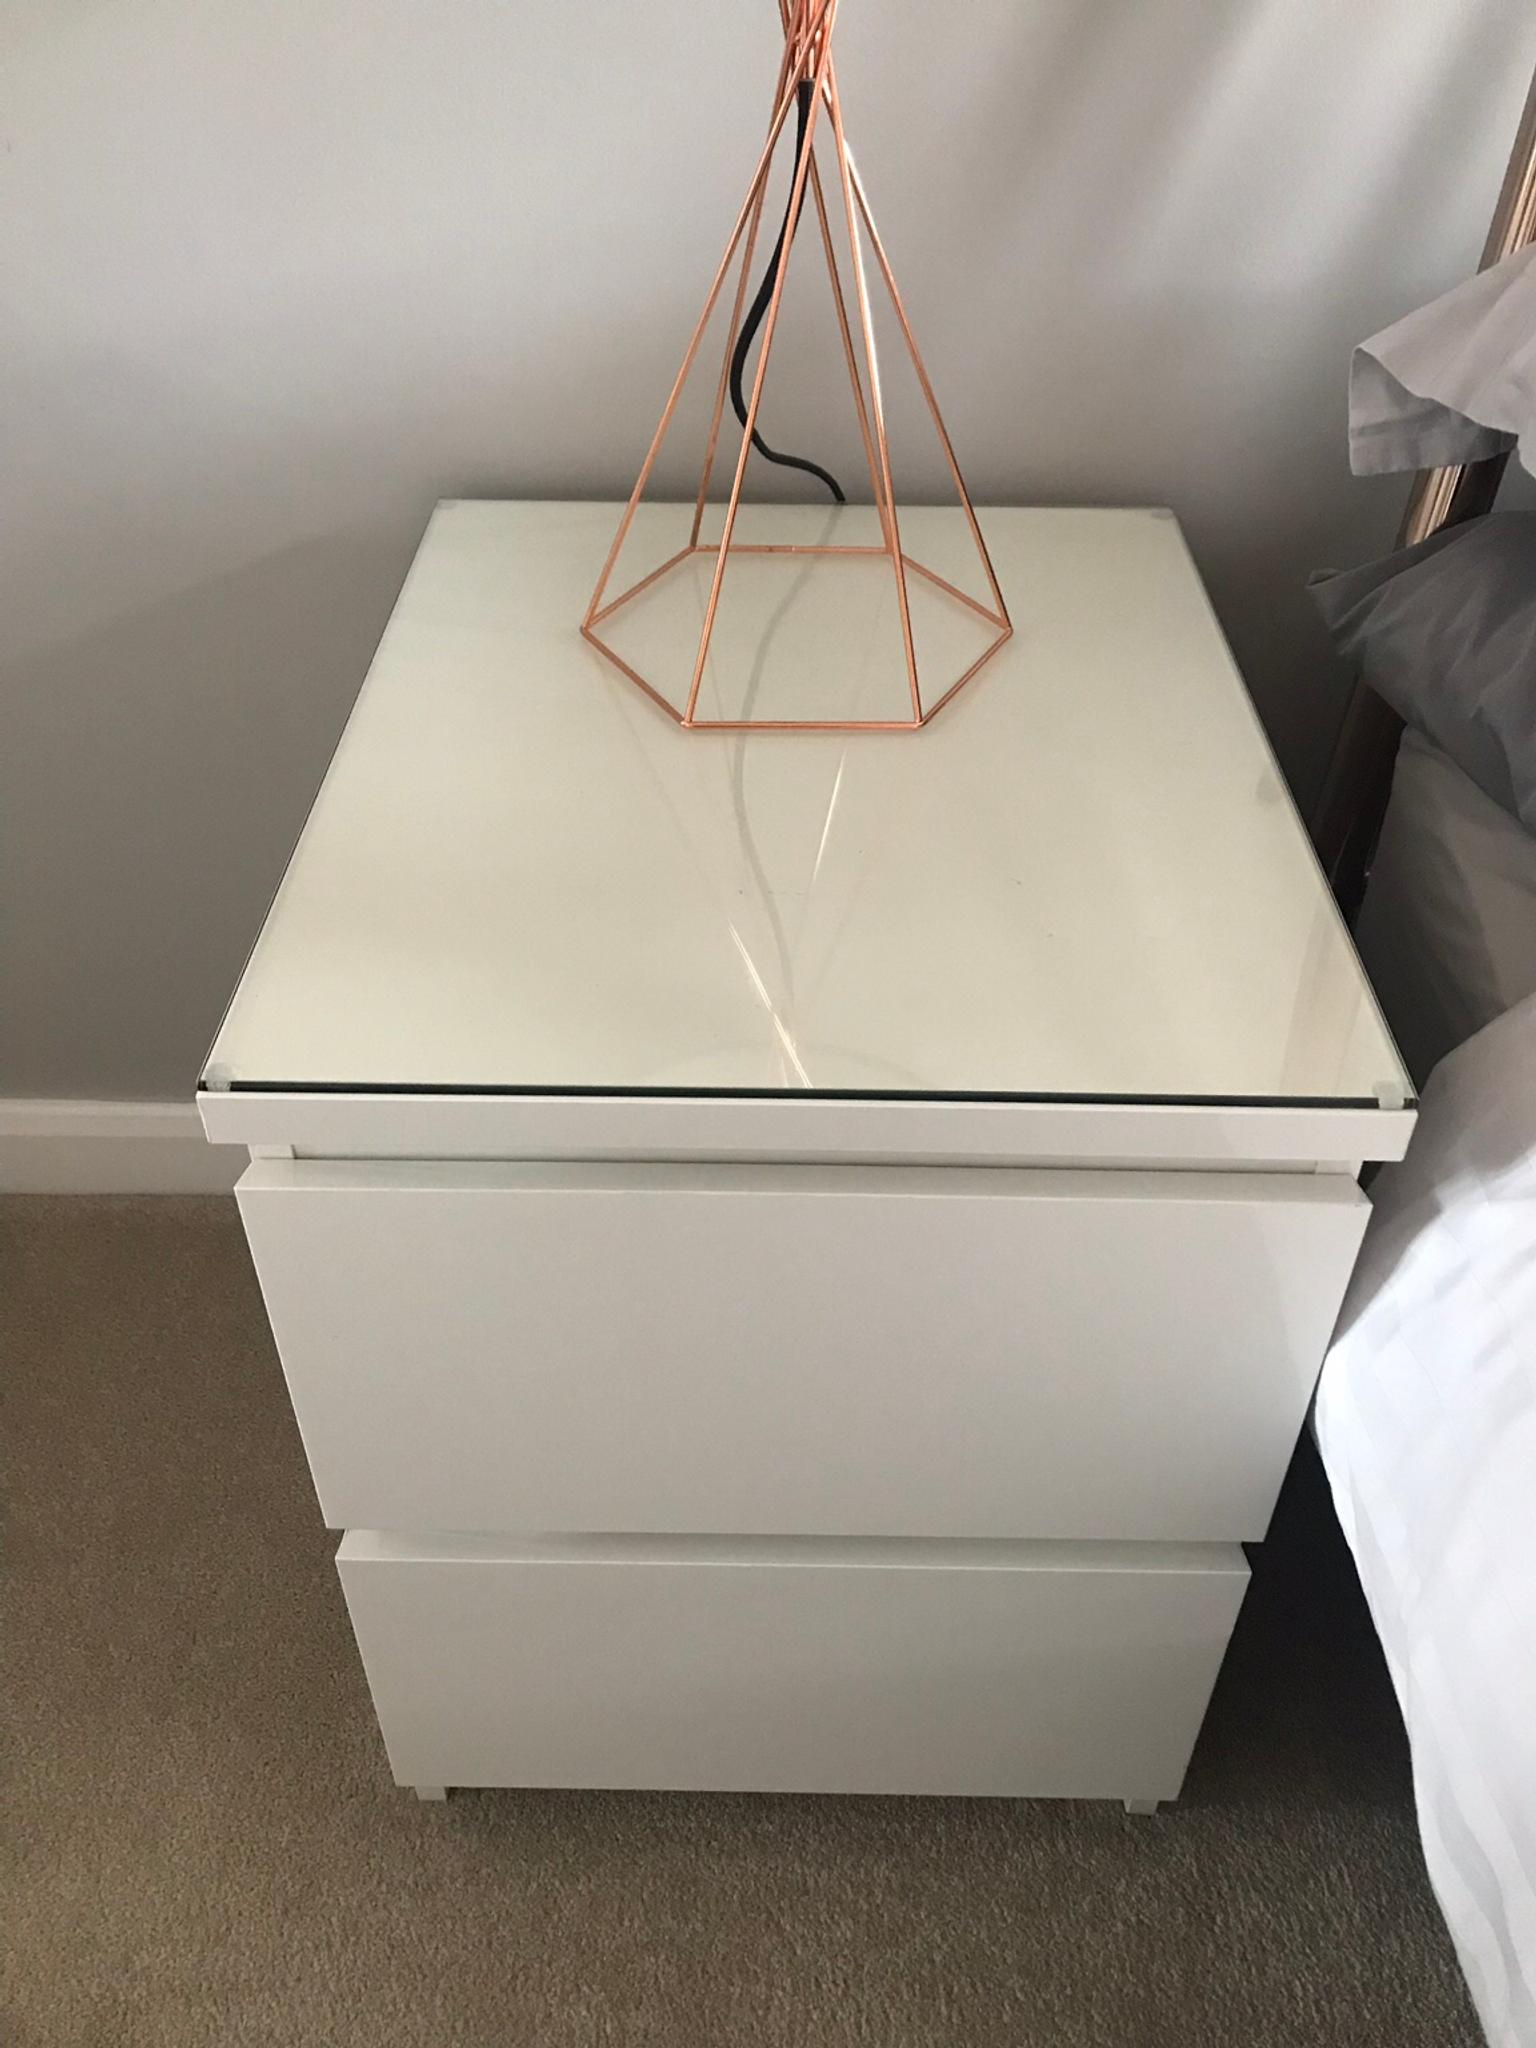 Ikea Malm white high gloss bedroom furniture in CV11 Hinckley and Bosworth for £100.00 for sale ...